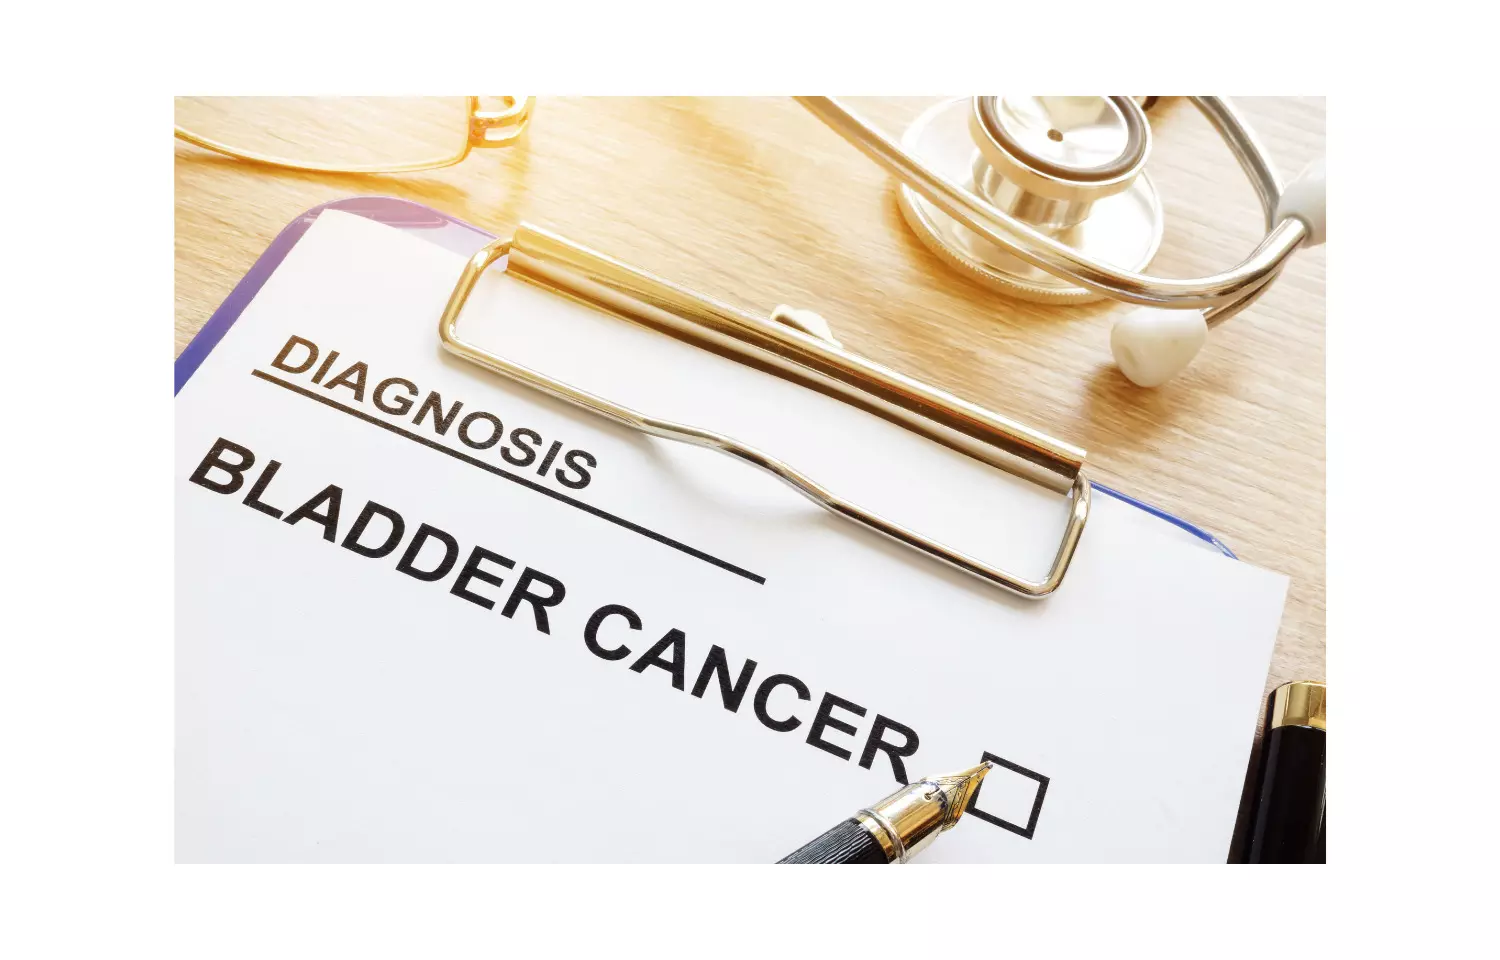 HYAL-1 and survivin suitable urine biomarkers for bladder cancer diagnosis: Study